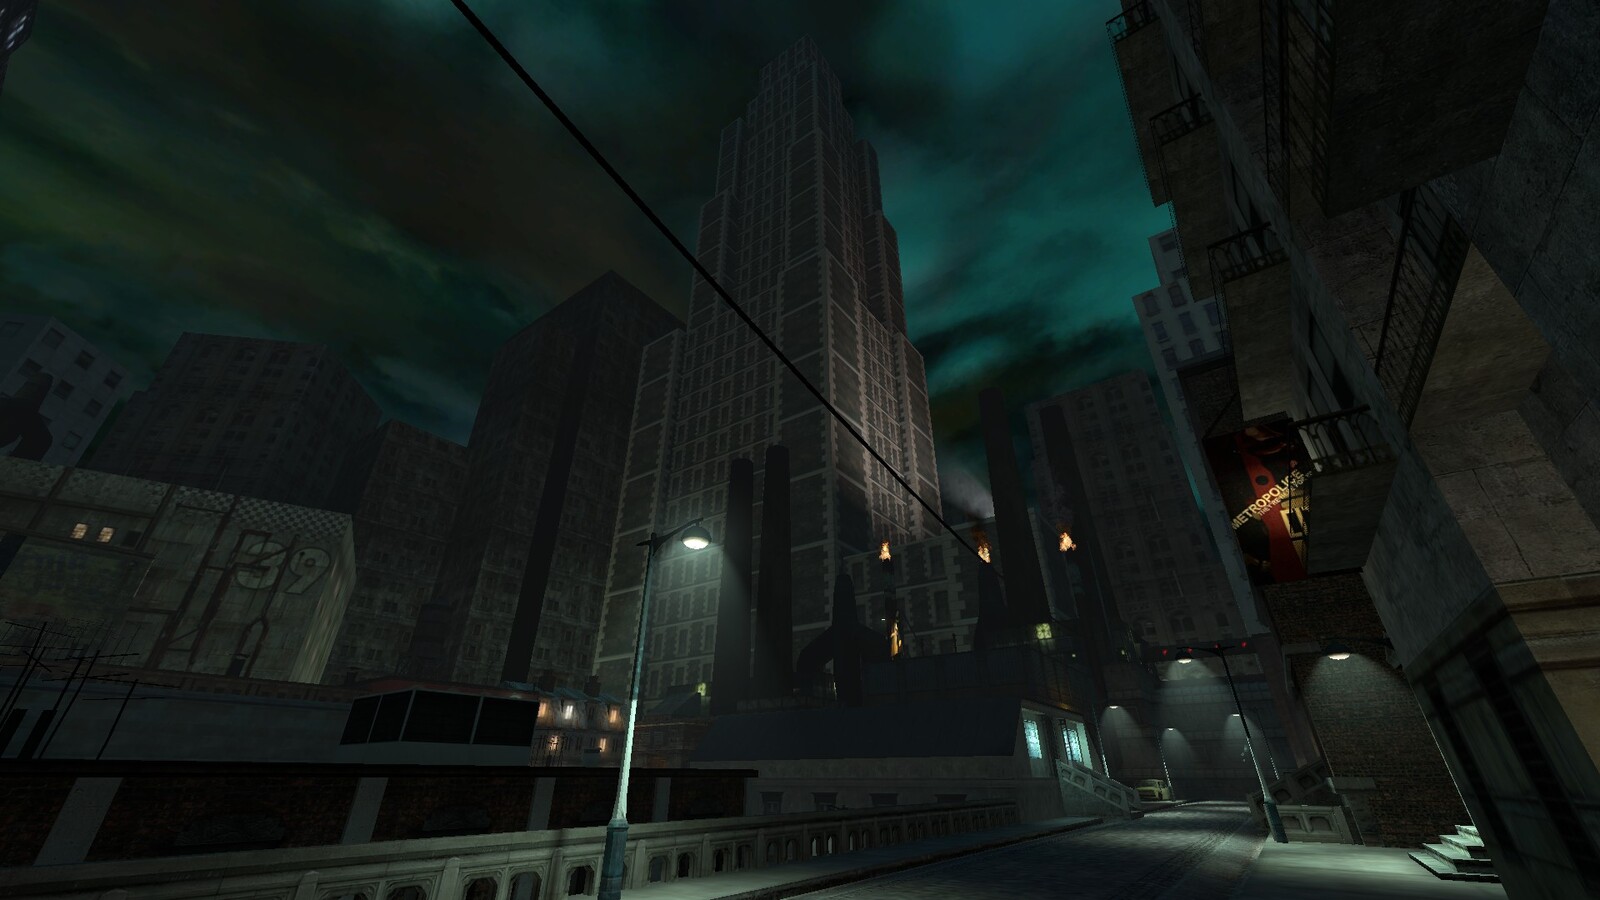 Another view of the level, showing a large skyscraper in the distance.